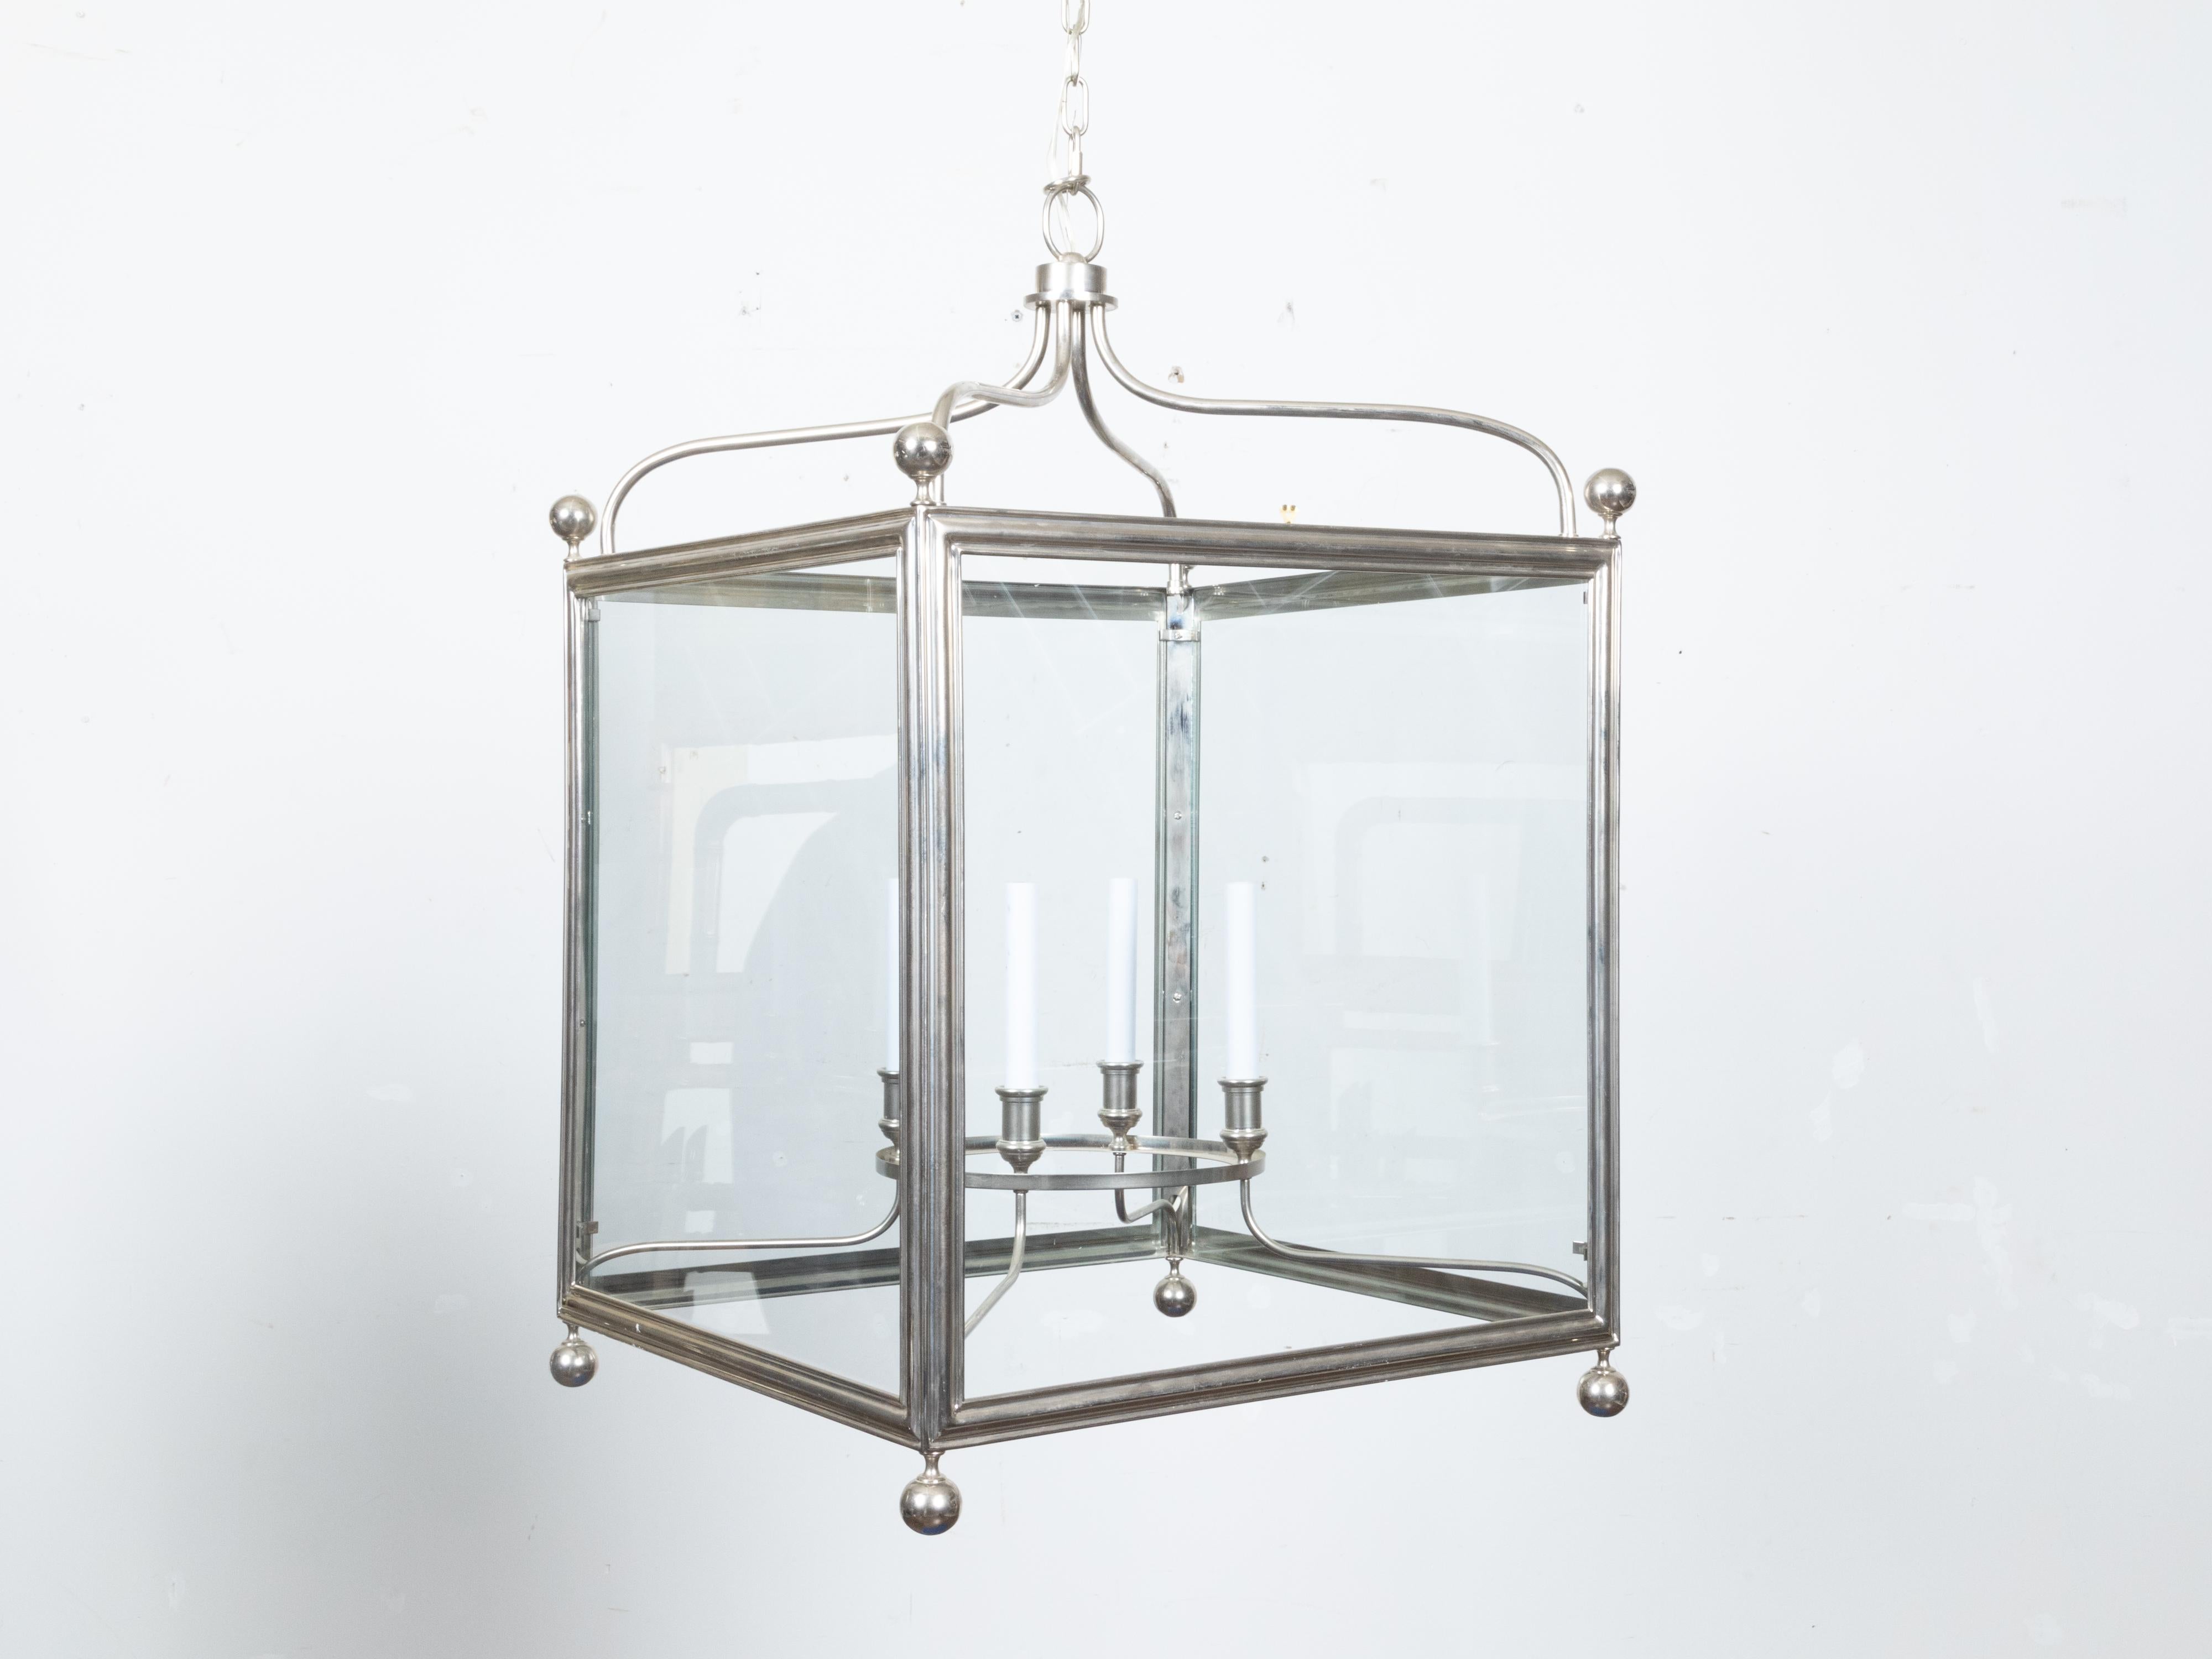 English Midcentury Four-Light Lantern with Silver Color and Petite Spheres In Good Condition For Sale In Atlanta, GA